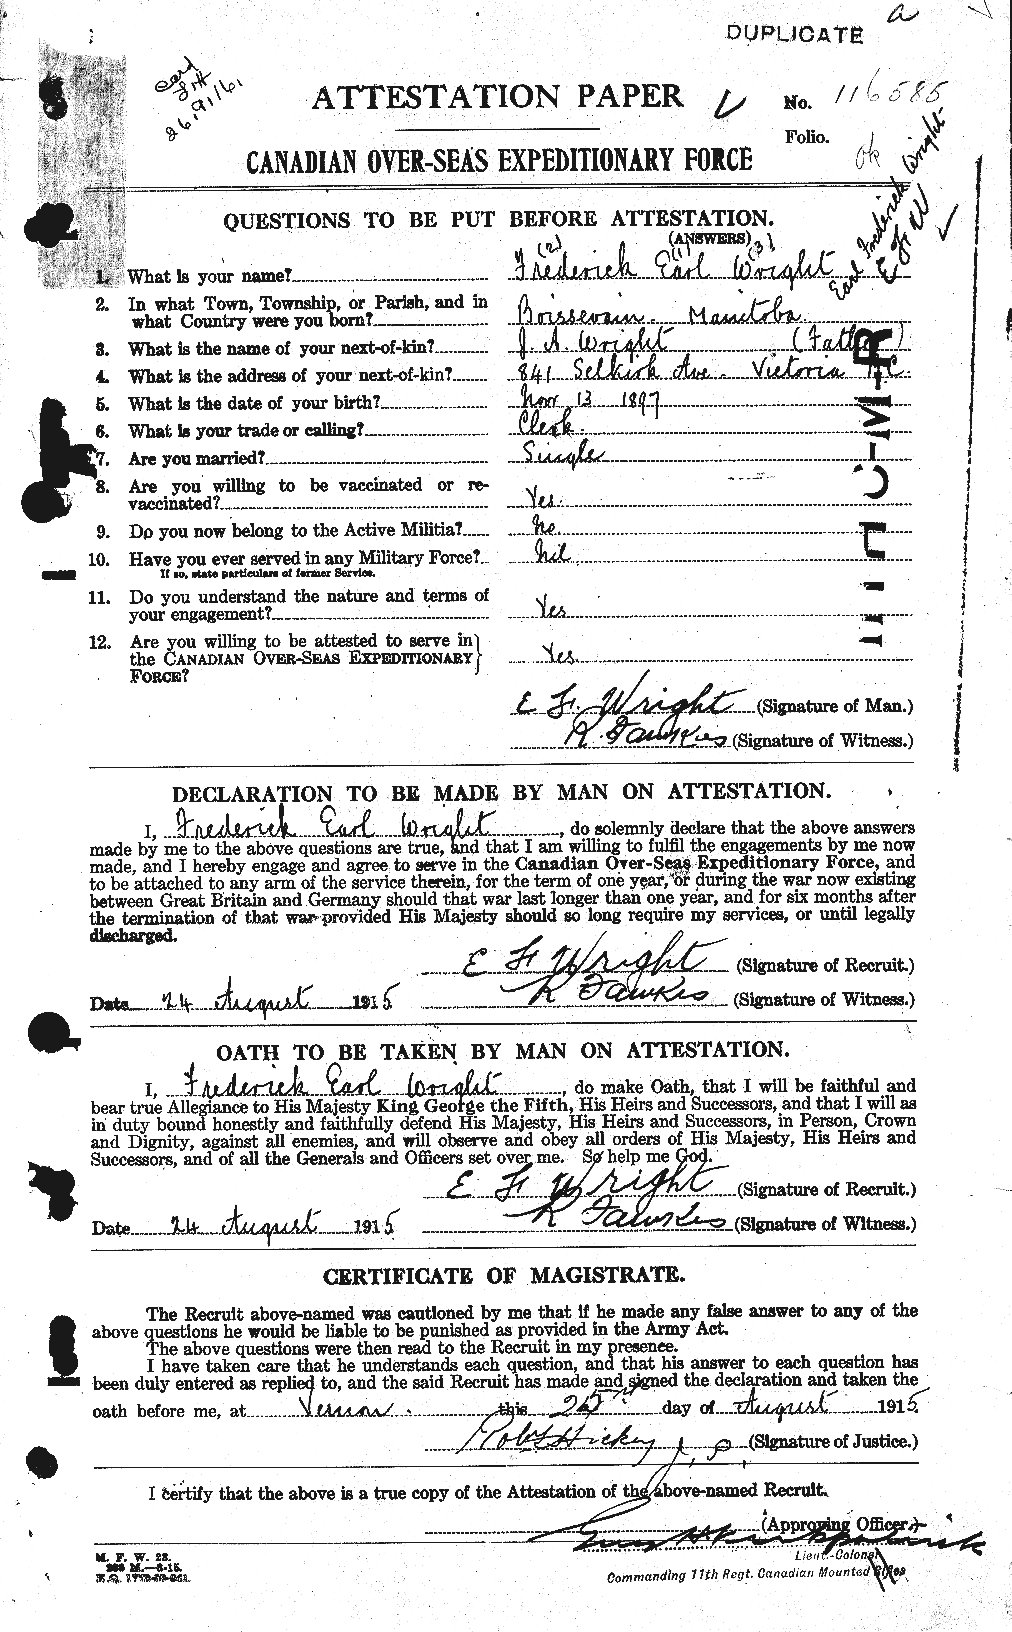 Personnel Records of the First World War - CEF 683807a